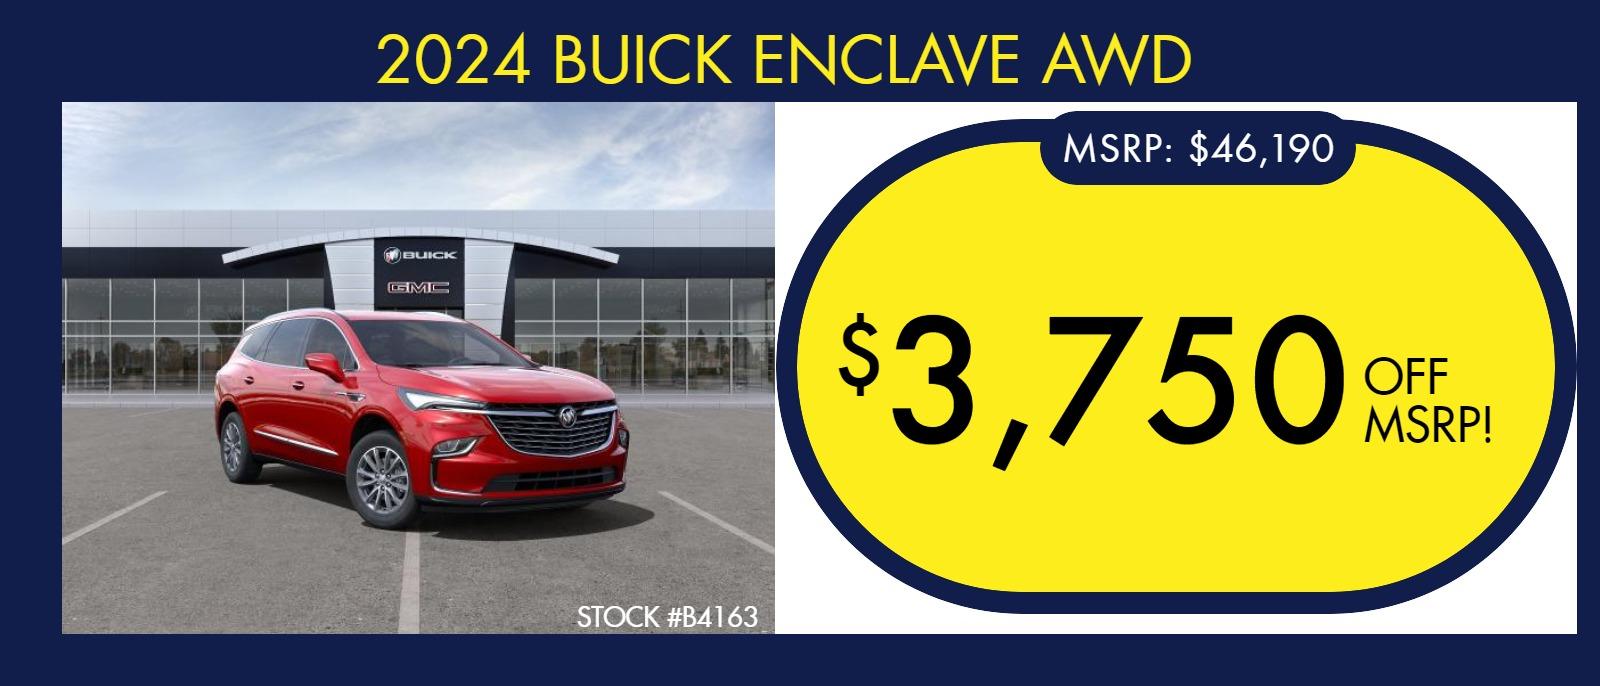 2024 Buick Enclave AWD 
Stock #B4162
 MSRP: $48,315
$3,750 OFF MSRP!